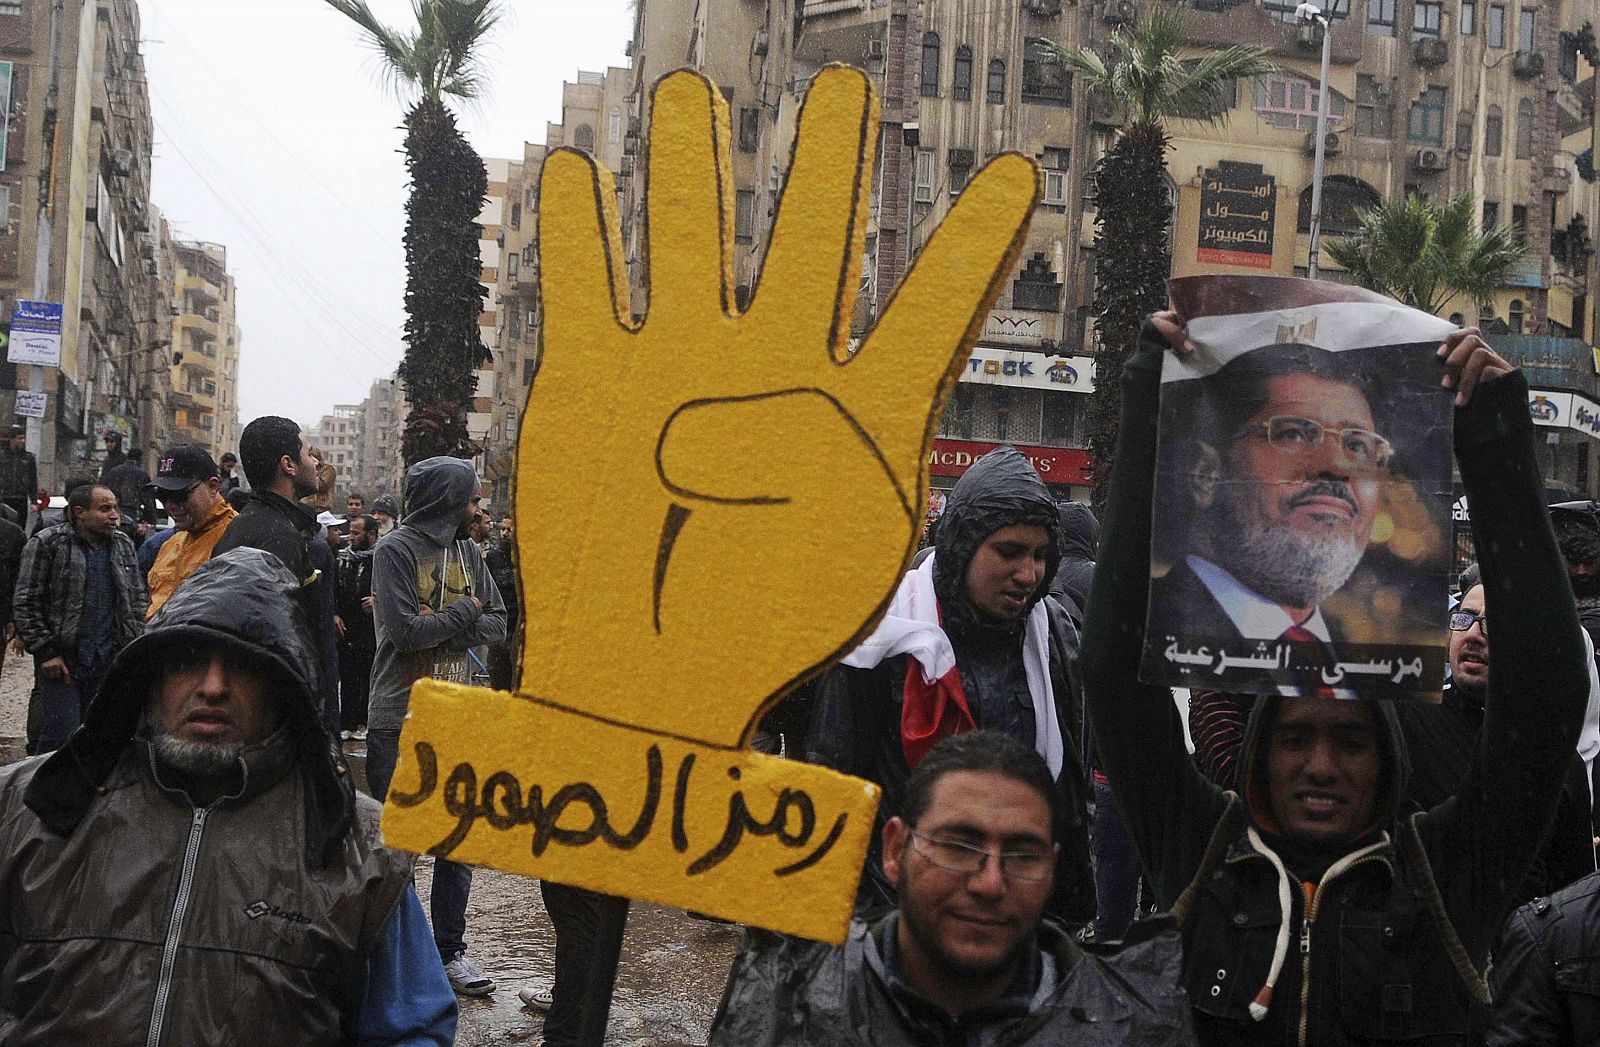 Supporters of the Muslim Brotherhood and ousted Egyptian President Mursi, raise a placard with a "Rabaa" sign that reads "Symbol of steadfastness" during a protest in Al-Haram street, in Cairo